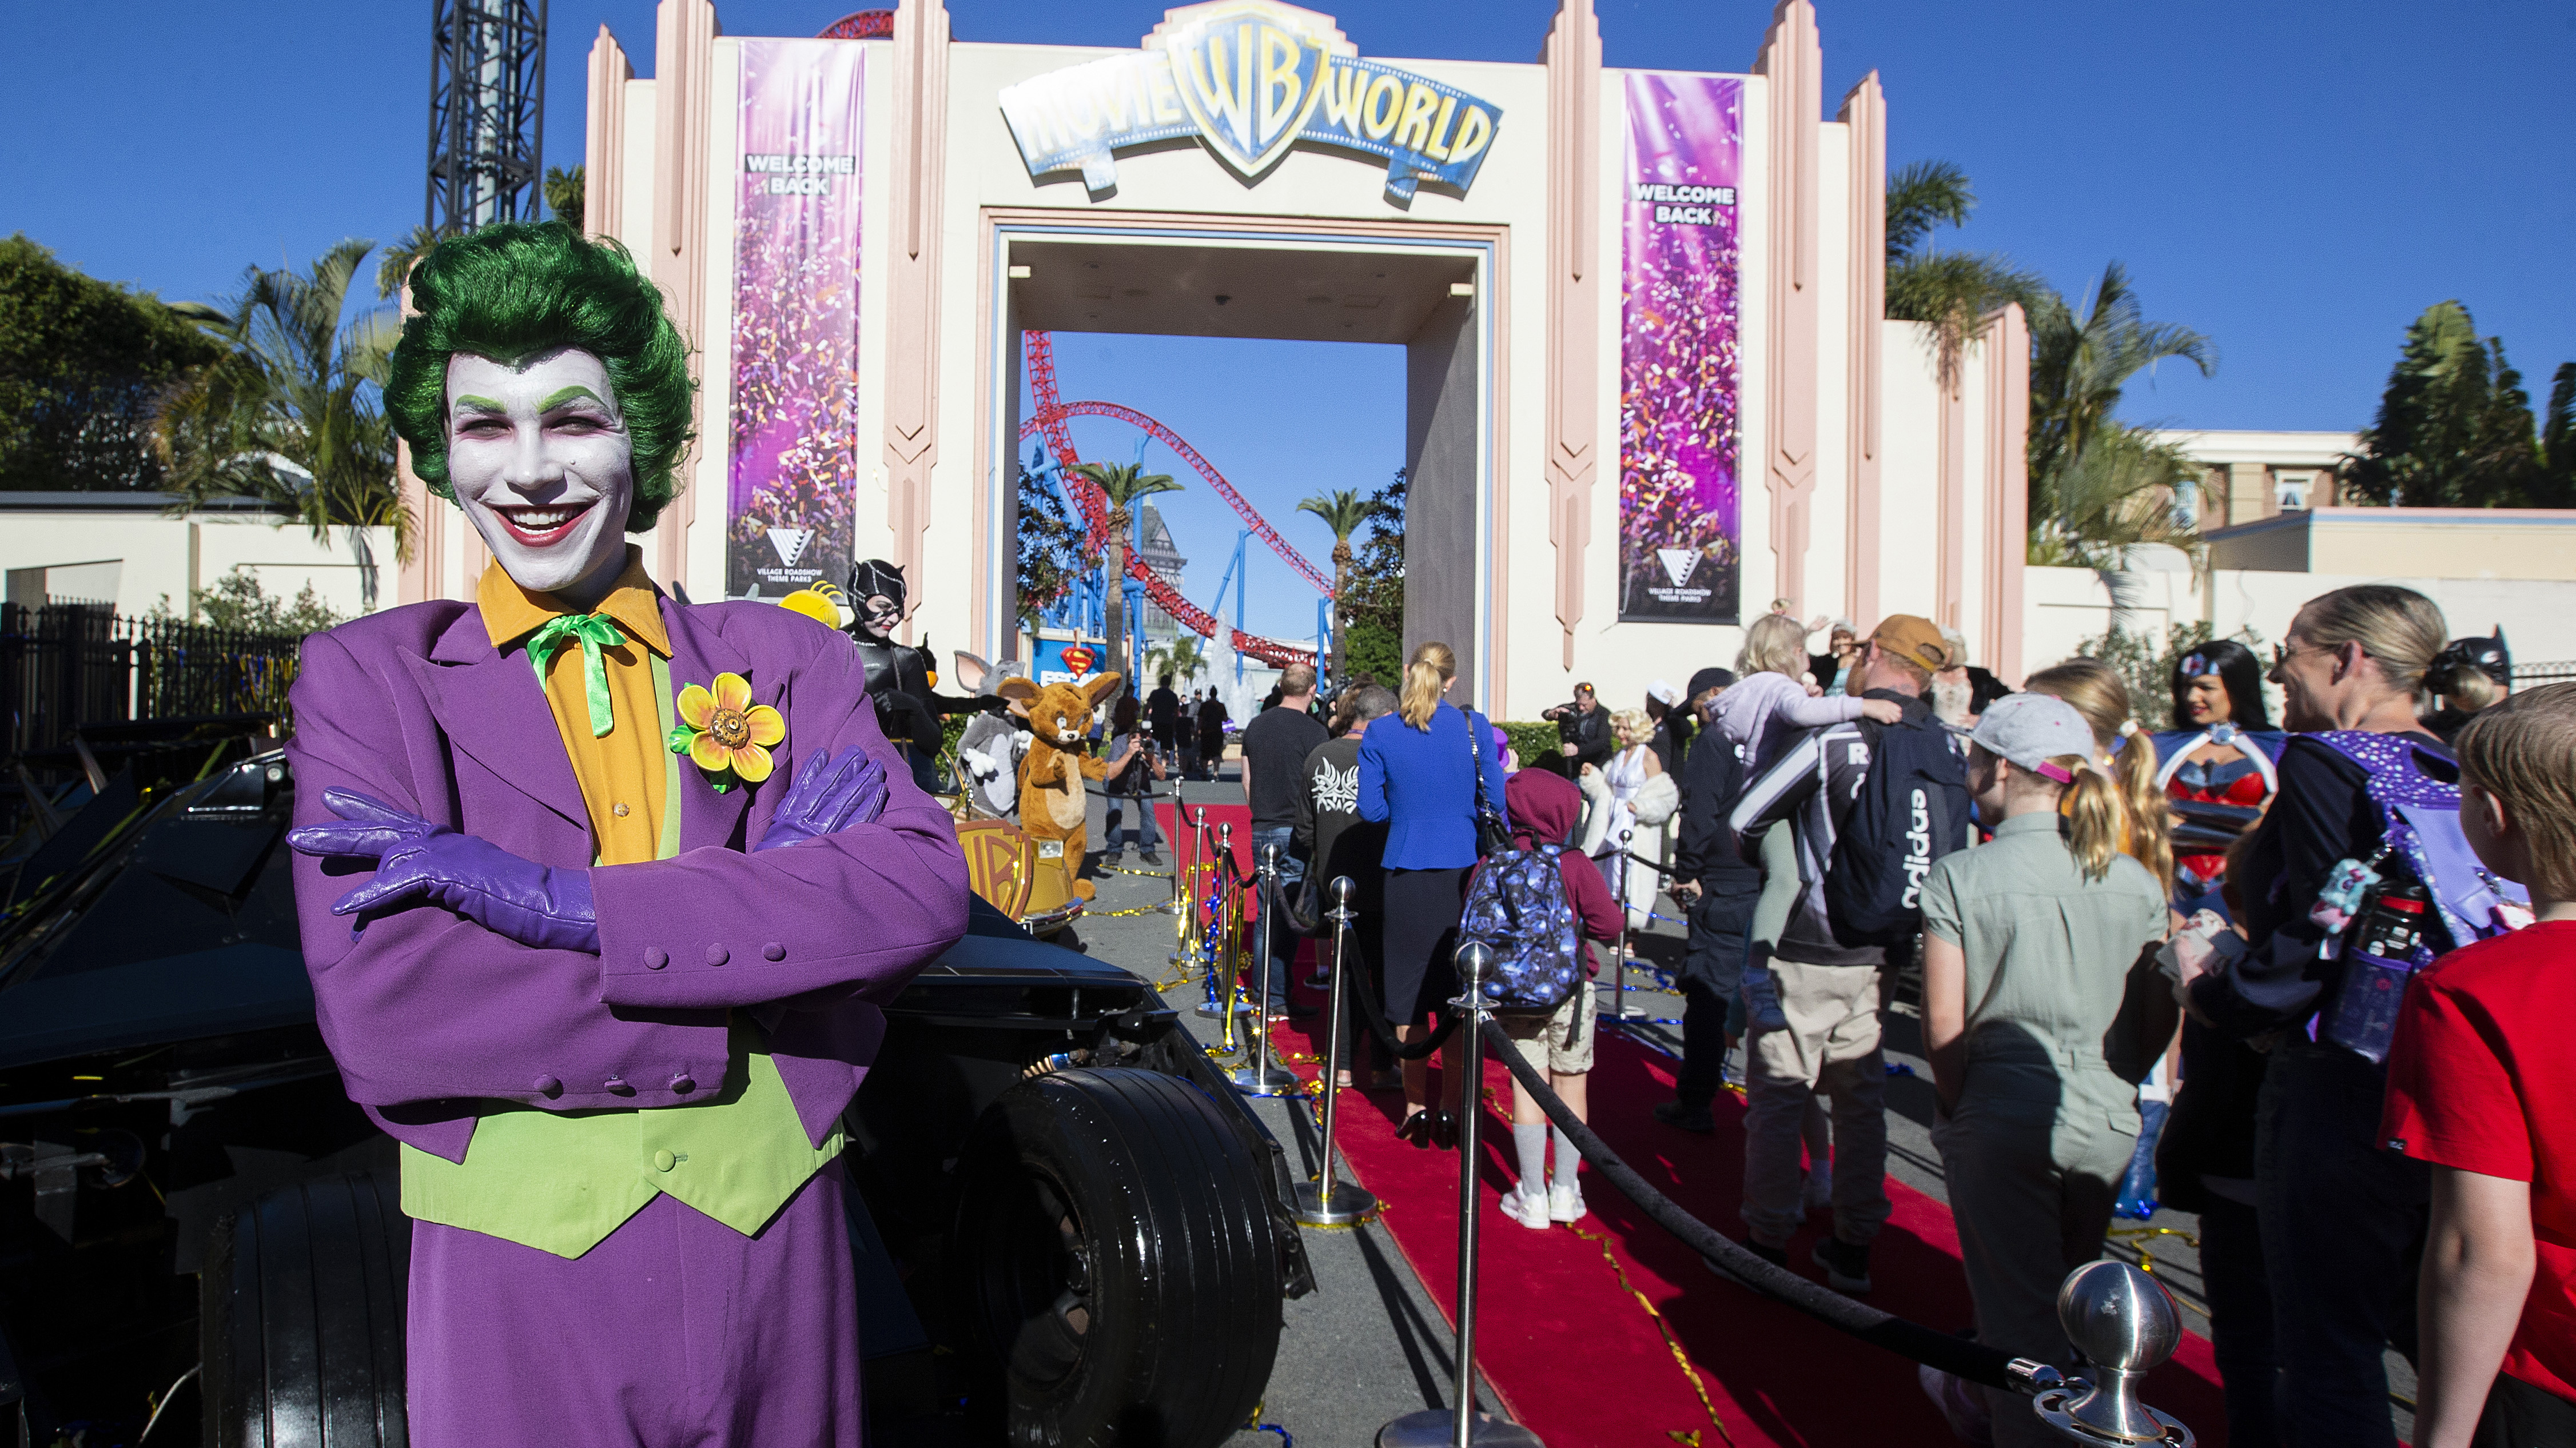 A performer welcomes guests at Warner Bros. Movie World on July 15, 2020 in Gold Coast, Australia. Movie World has reopened to the public with extra safety and hygiene measures in place following its temporary closure on 23 March 2020 due to the COVID-19 pandemic. 